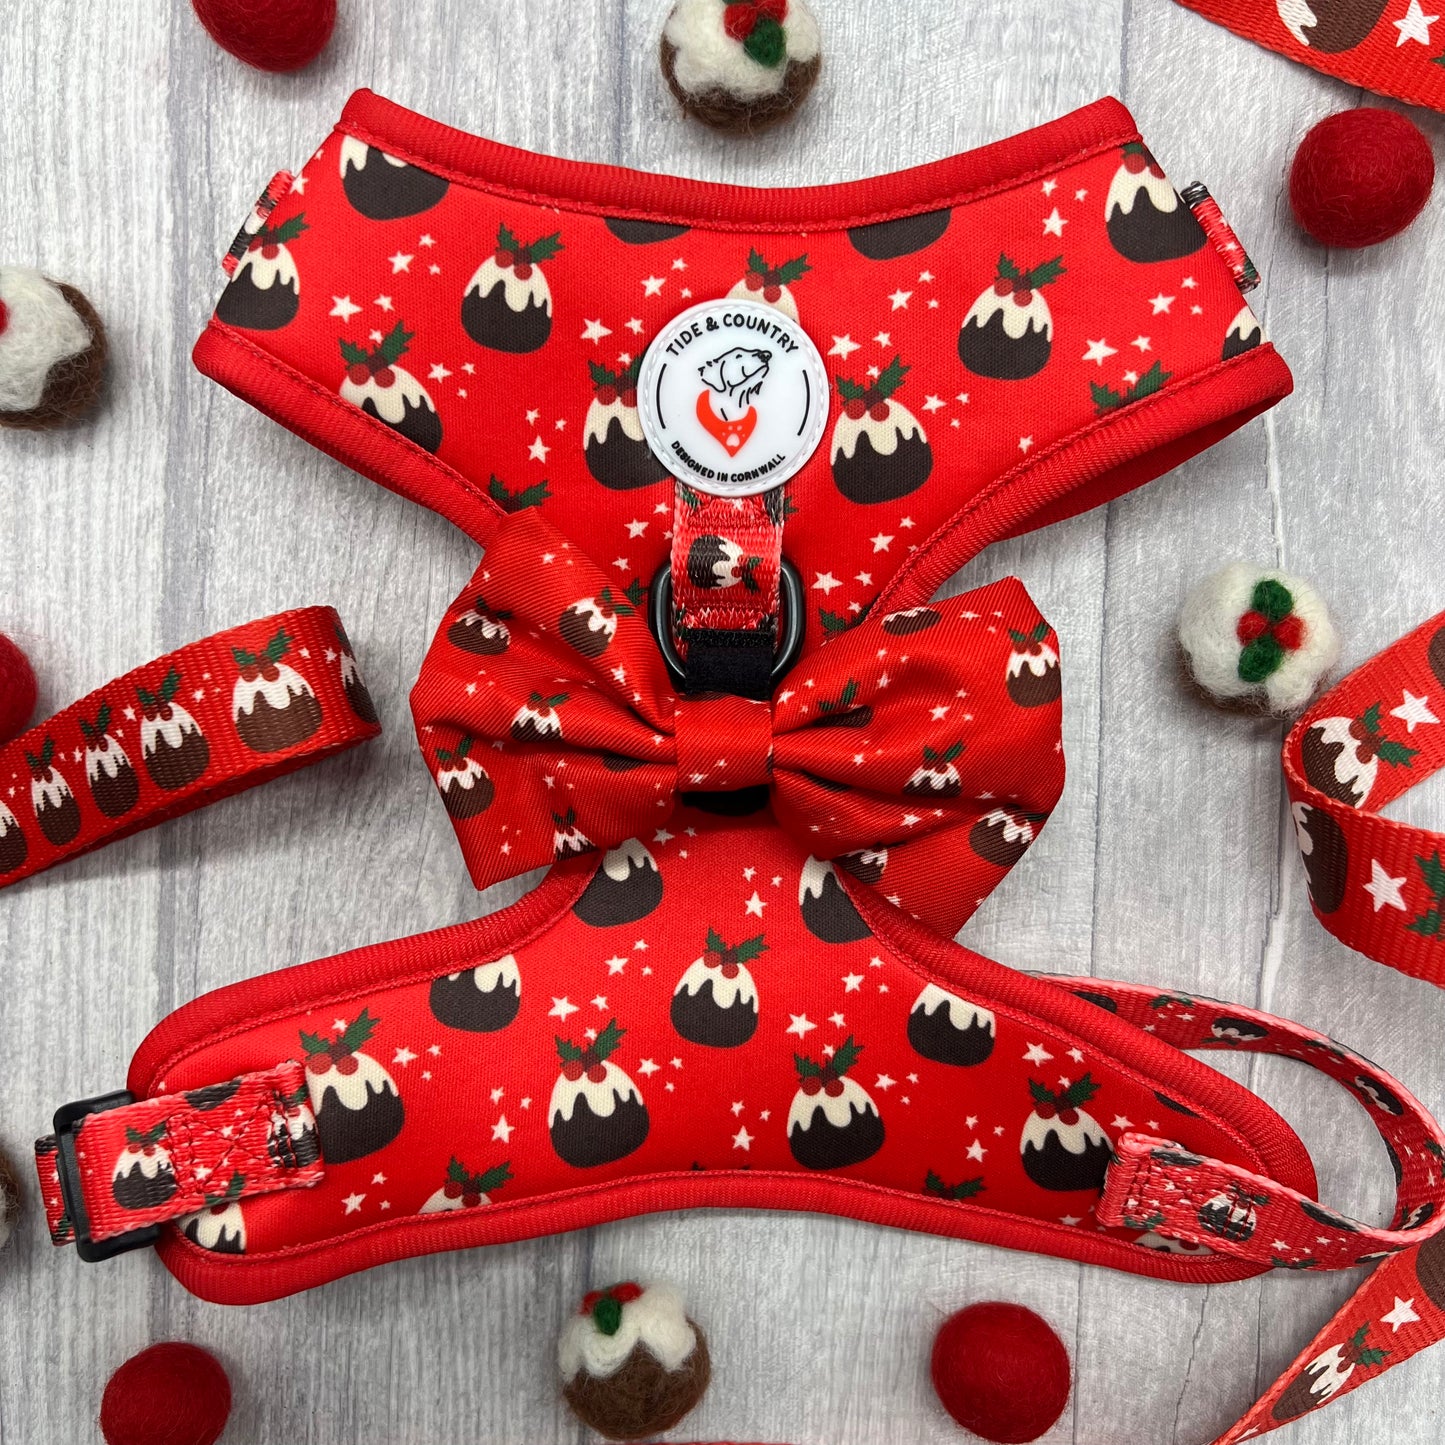 Paws off my pudding!Christmas bow tie